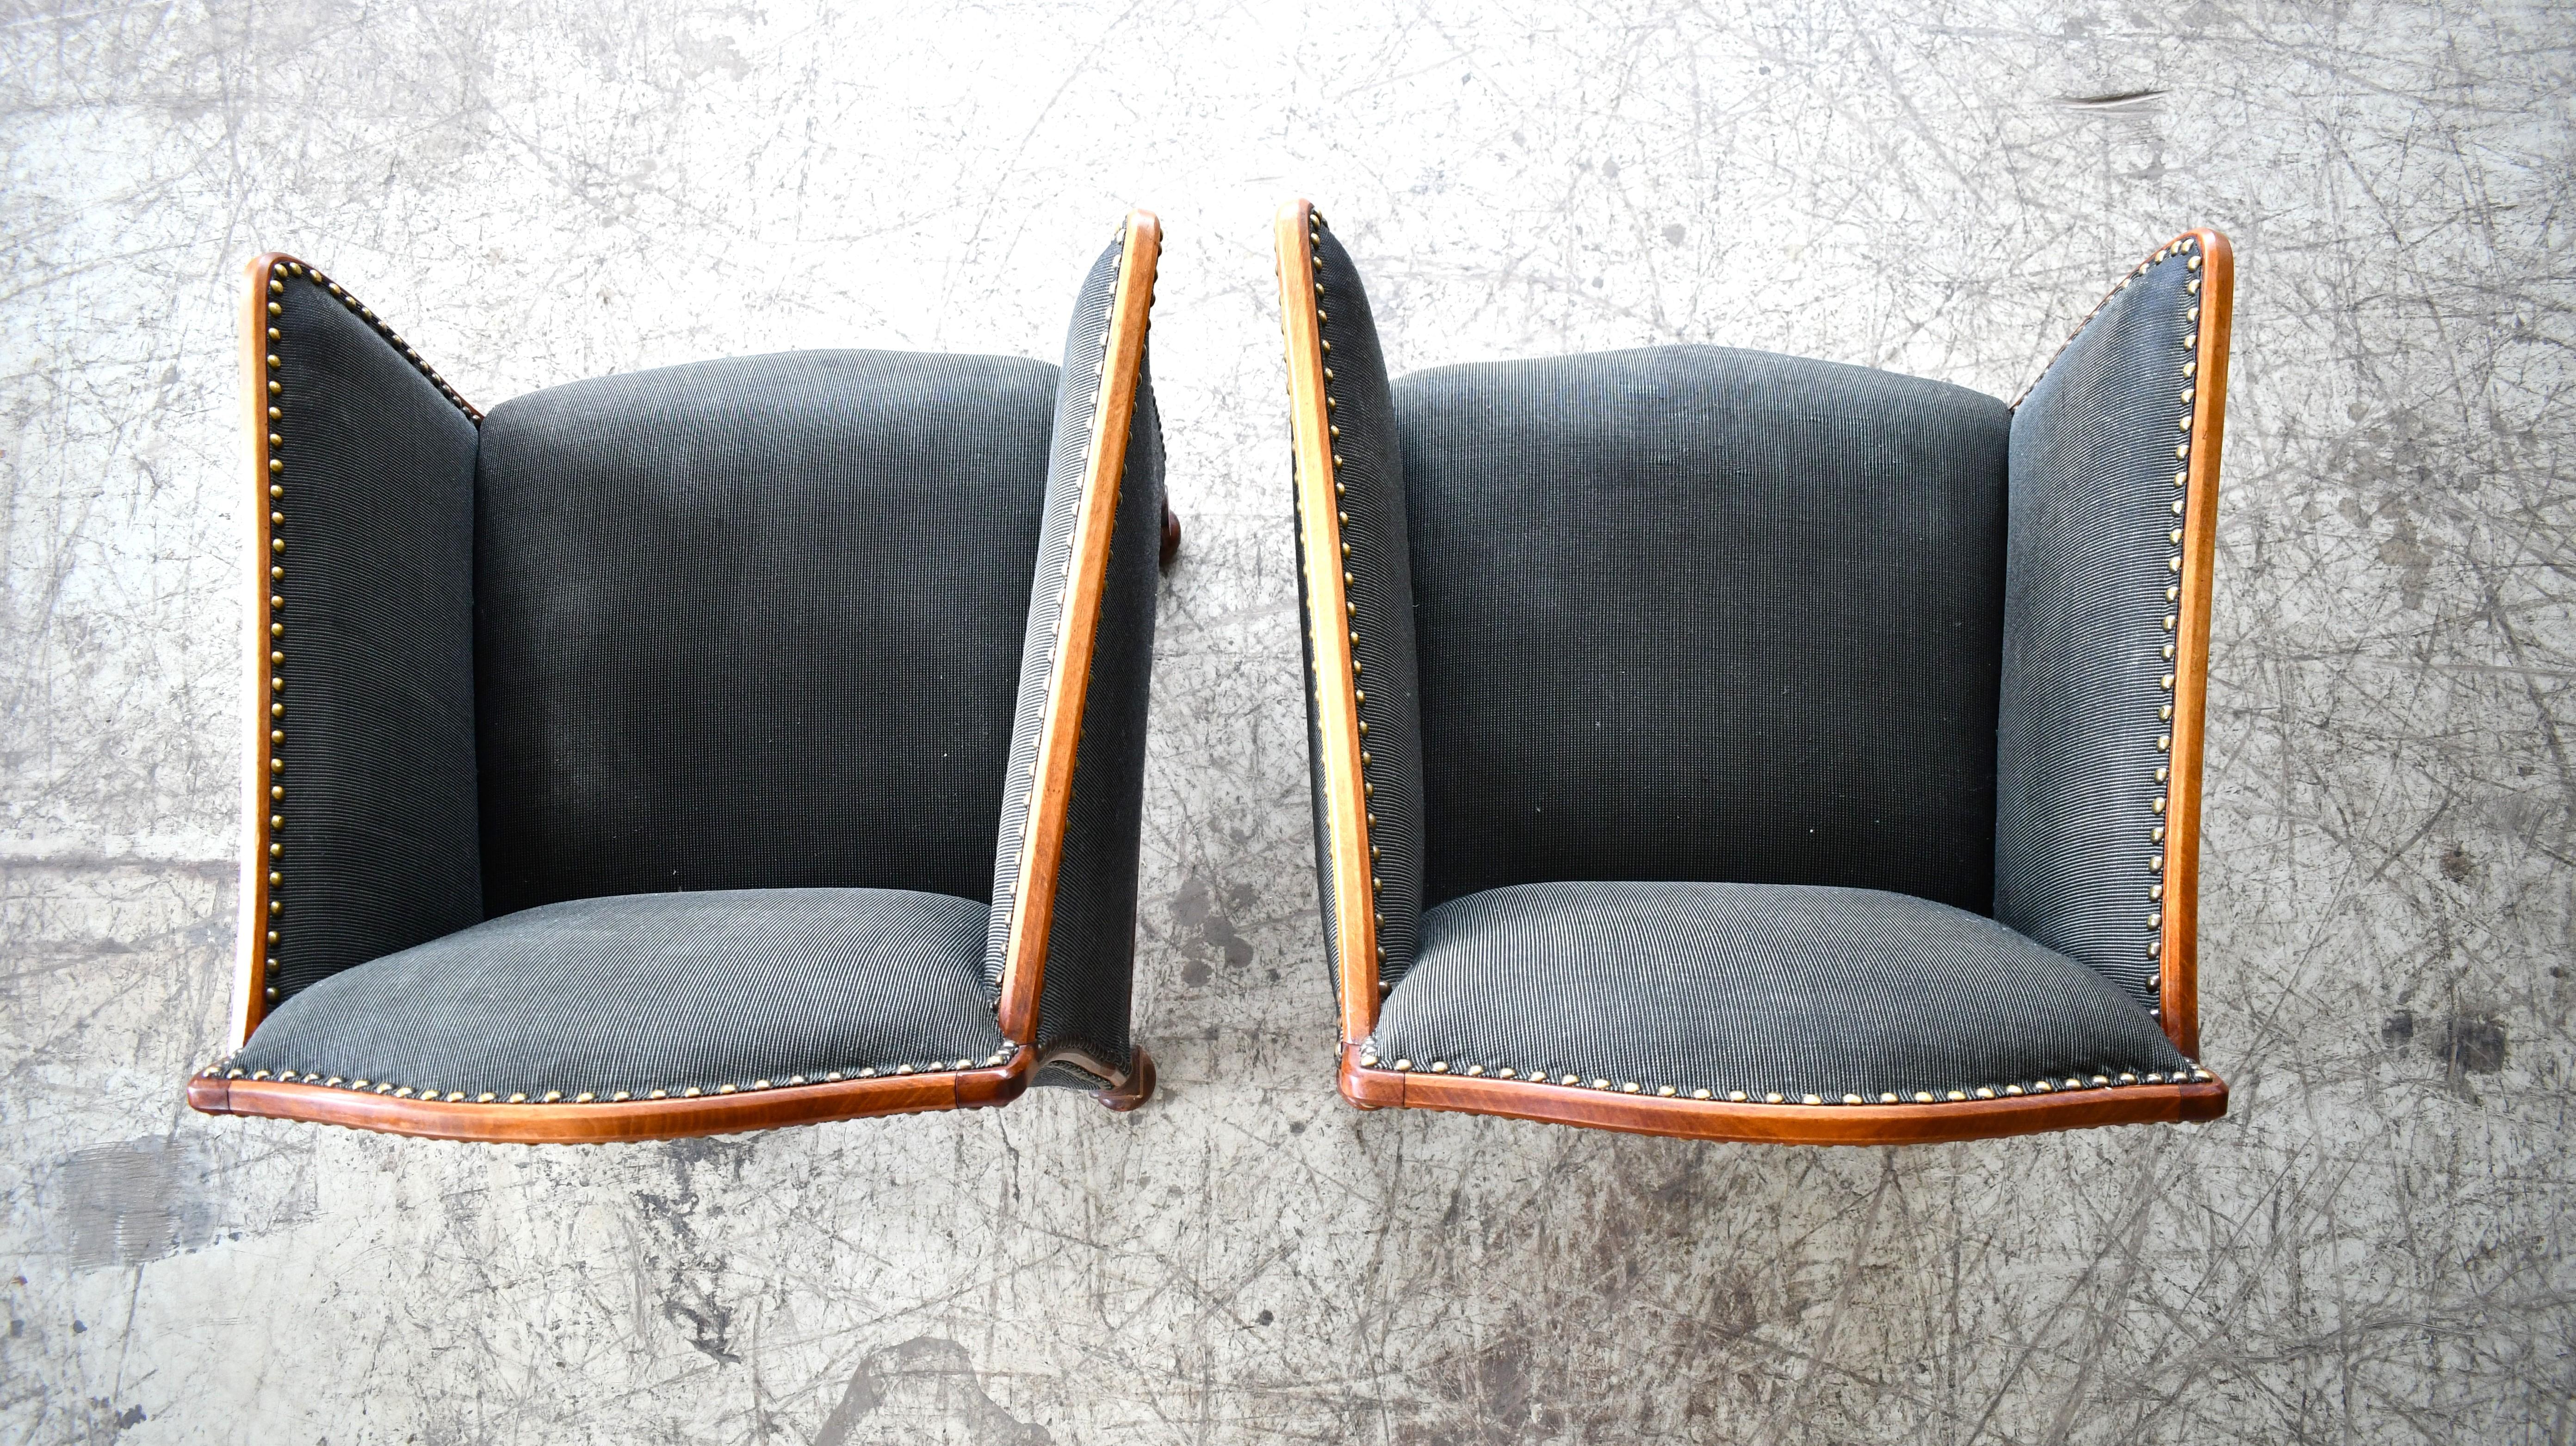 Mid-Century Modern Pair of Lounge Chairs with Carved Beech Wood Frames and Legs, Denmark 1930-40's